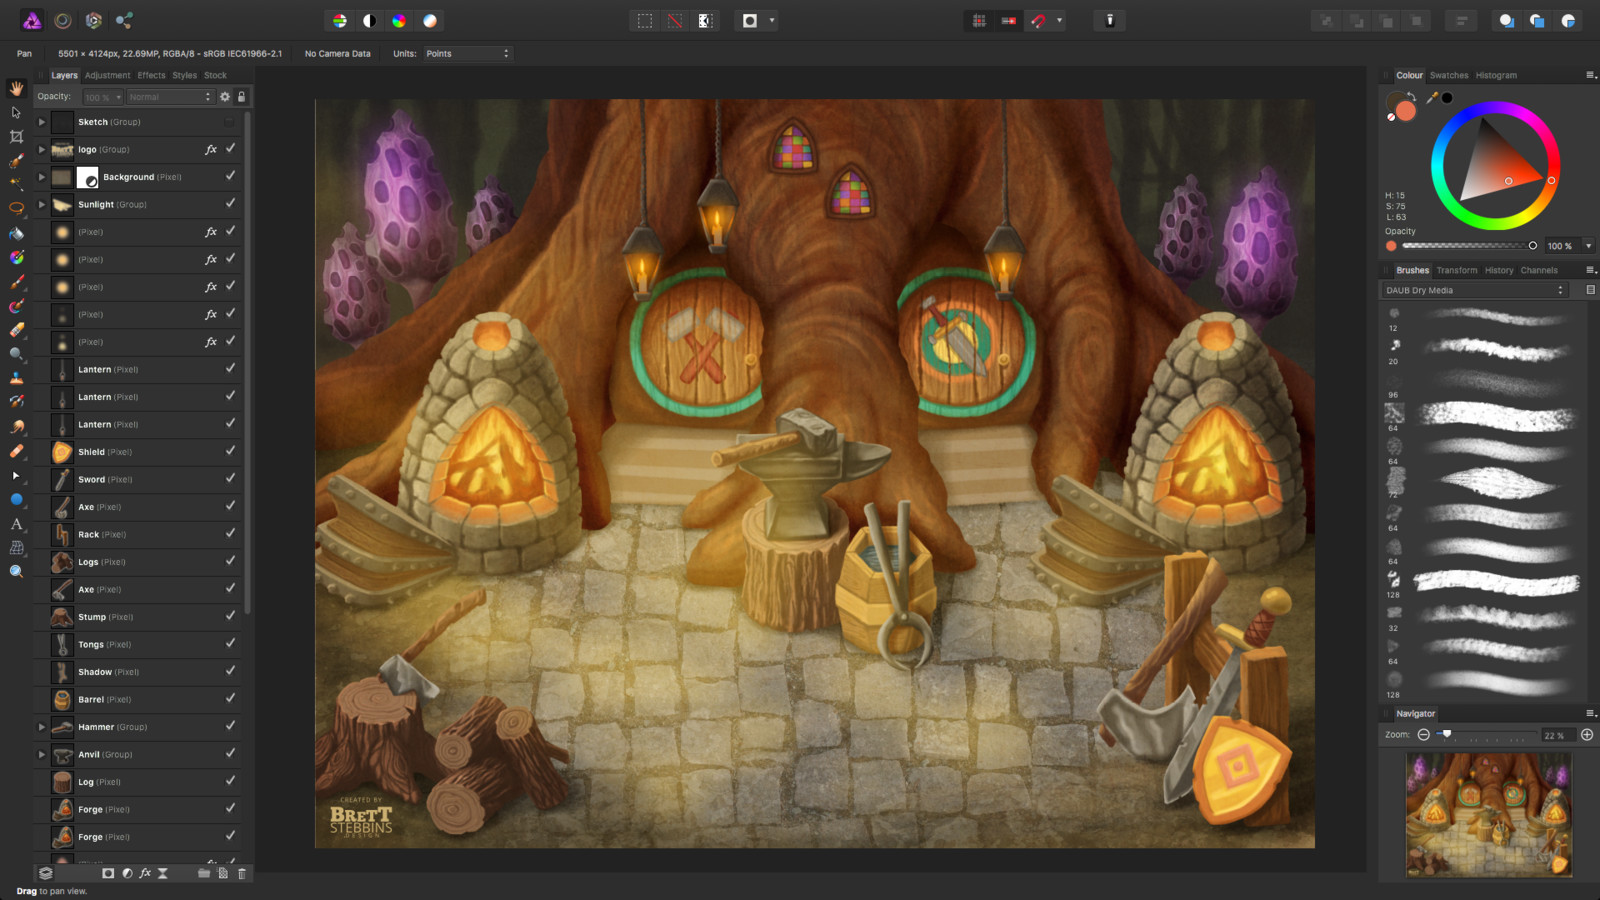 Process Step 4 - Add final details and light effects